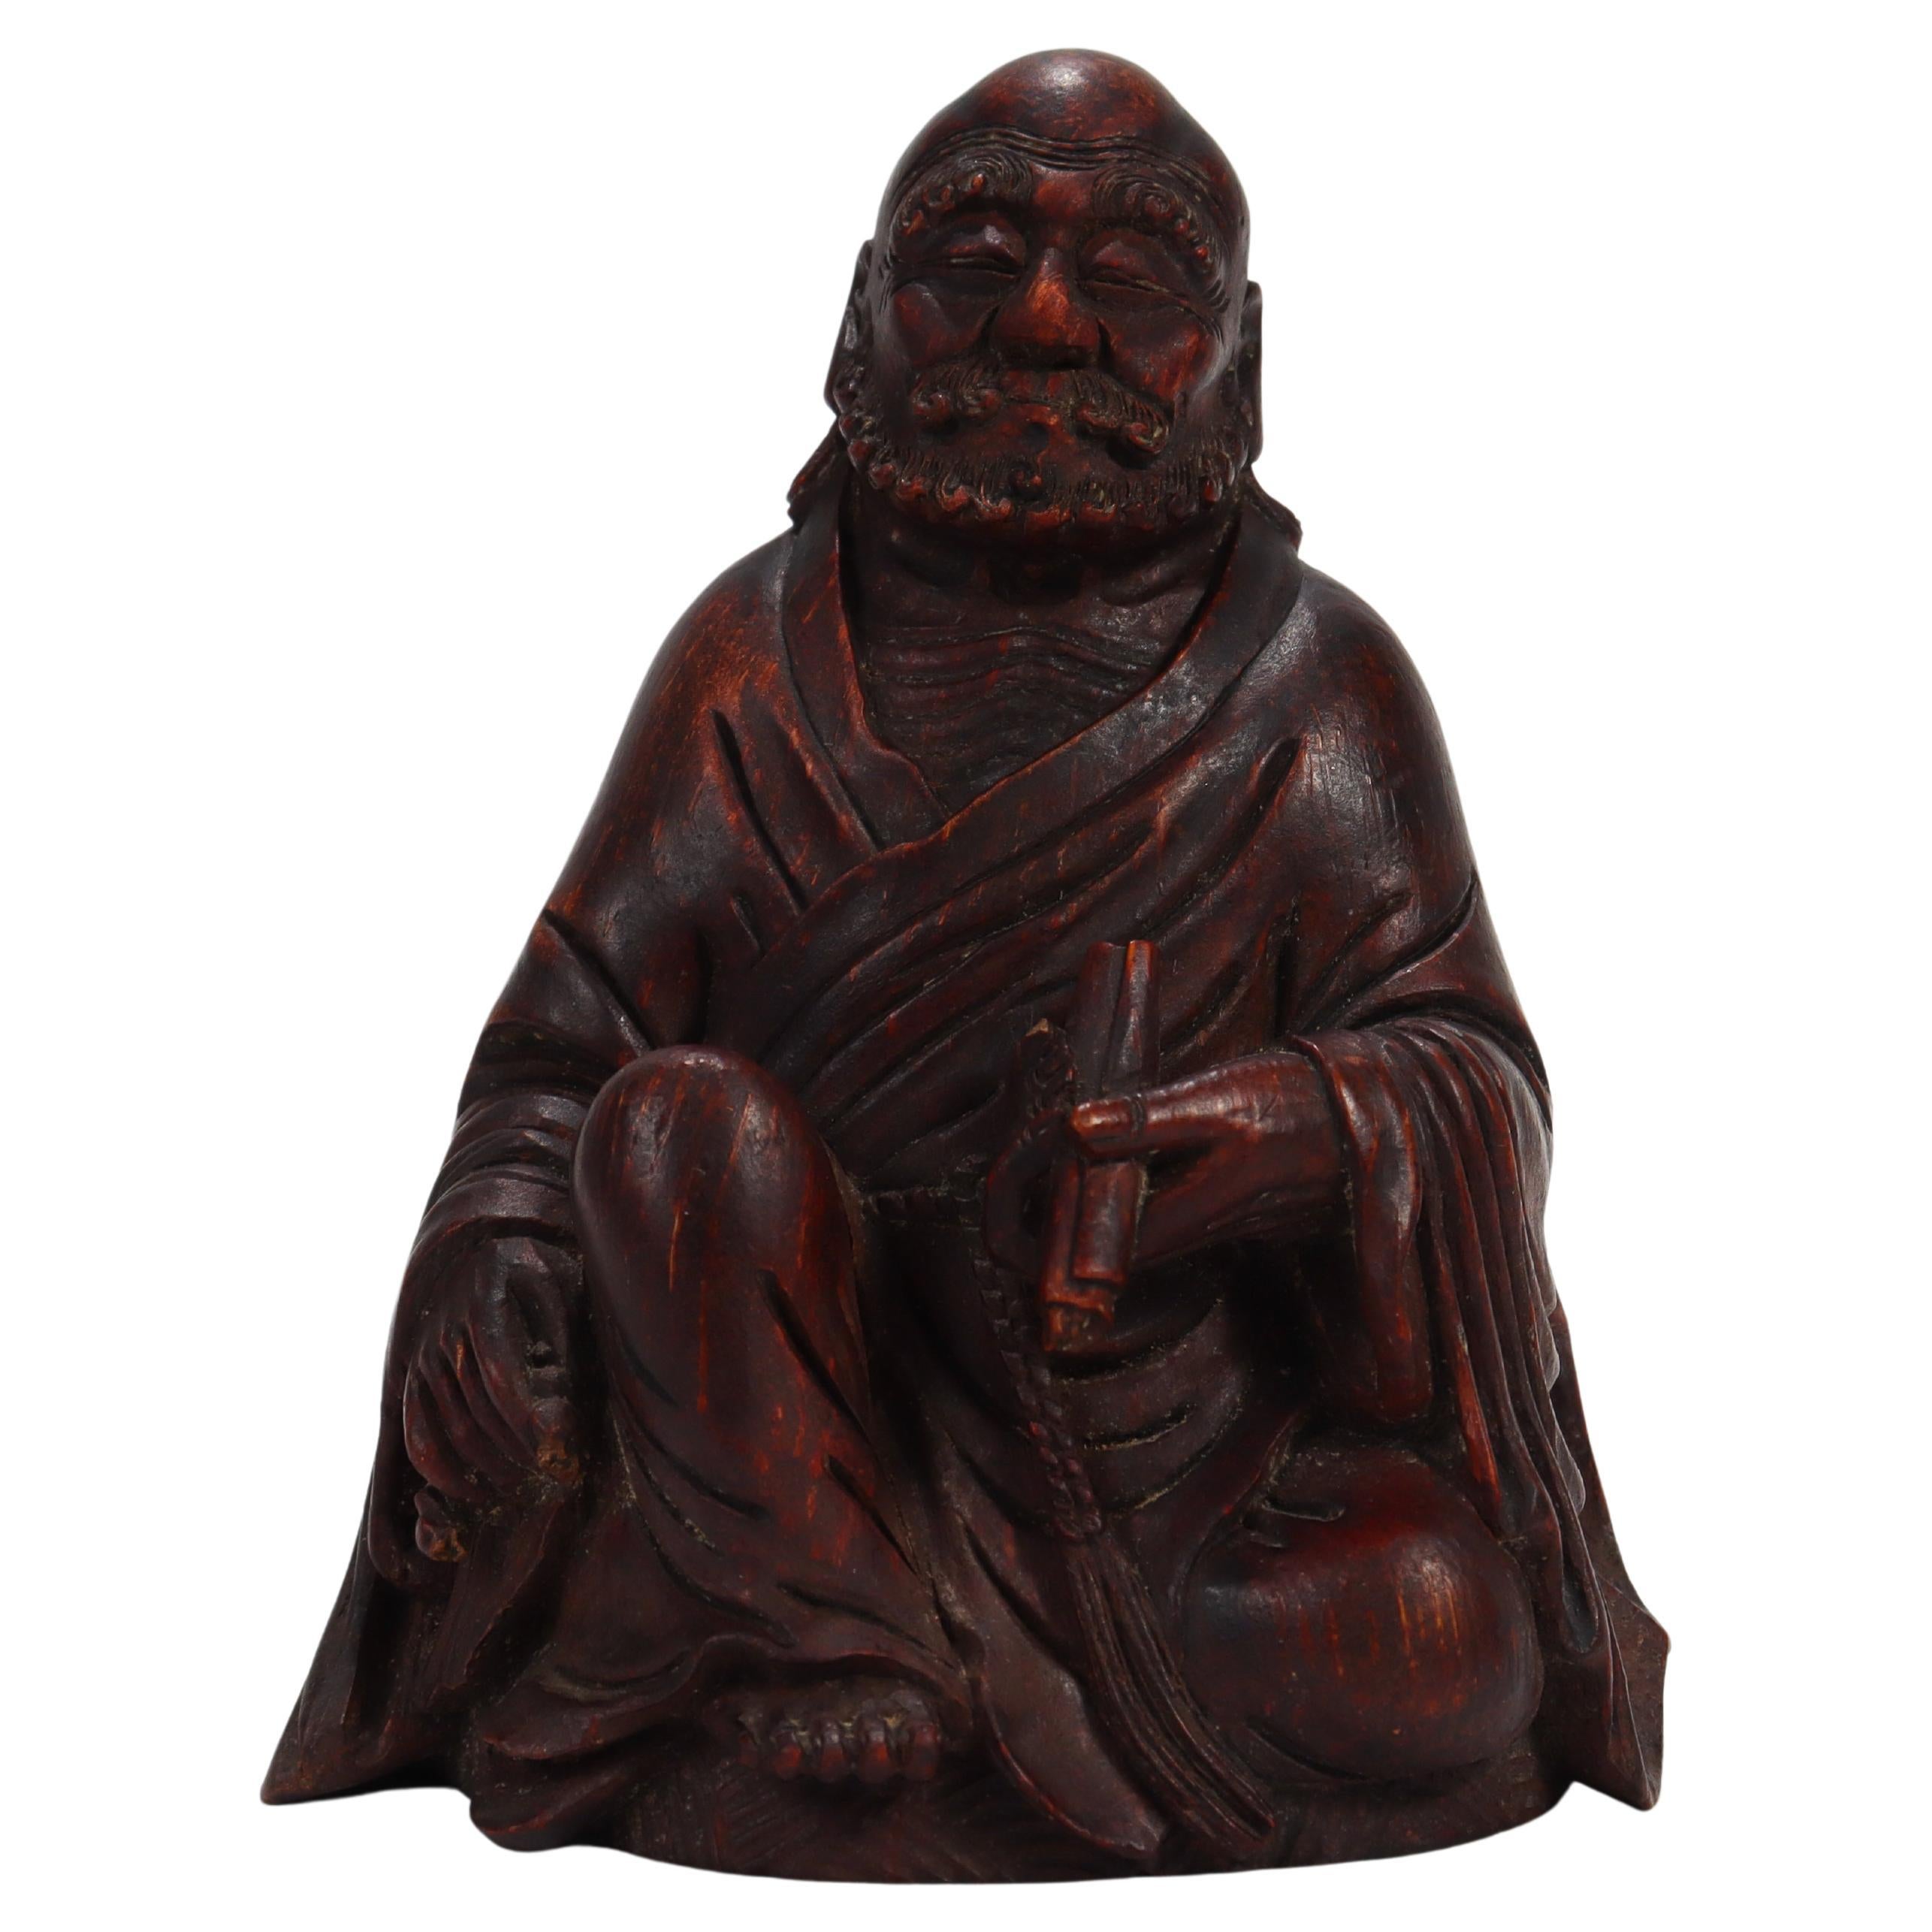 Old or Antique Japanese Wooden Figurine of a Buddhist Monk For Sale